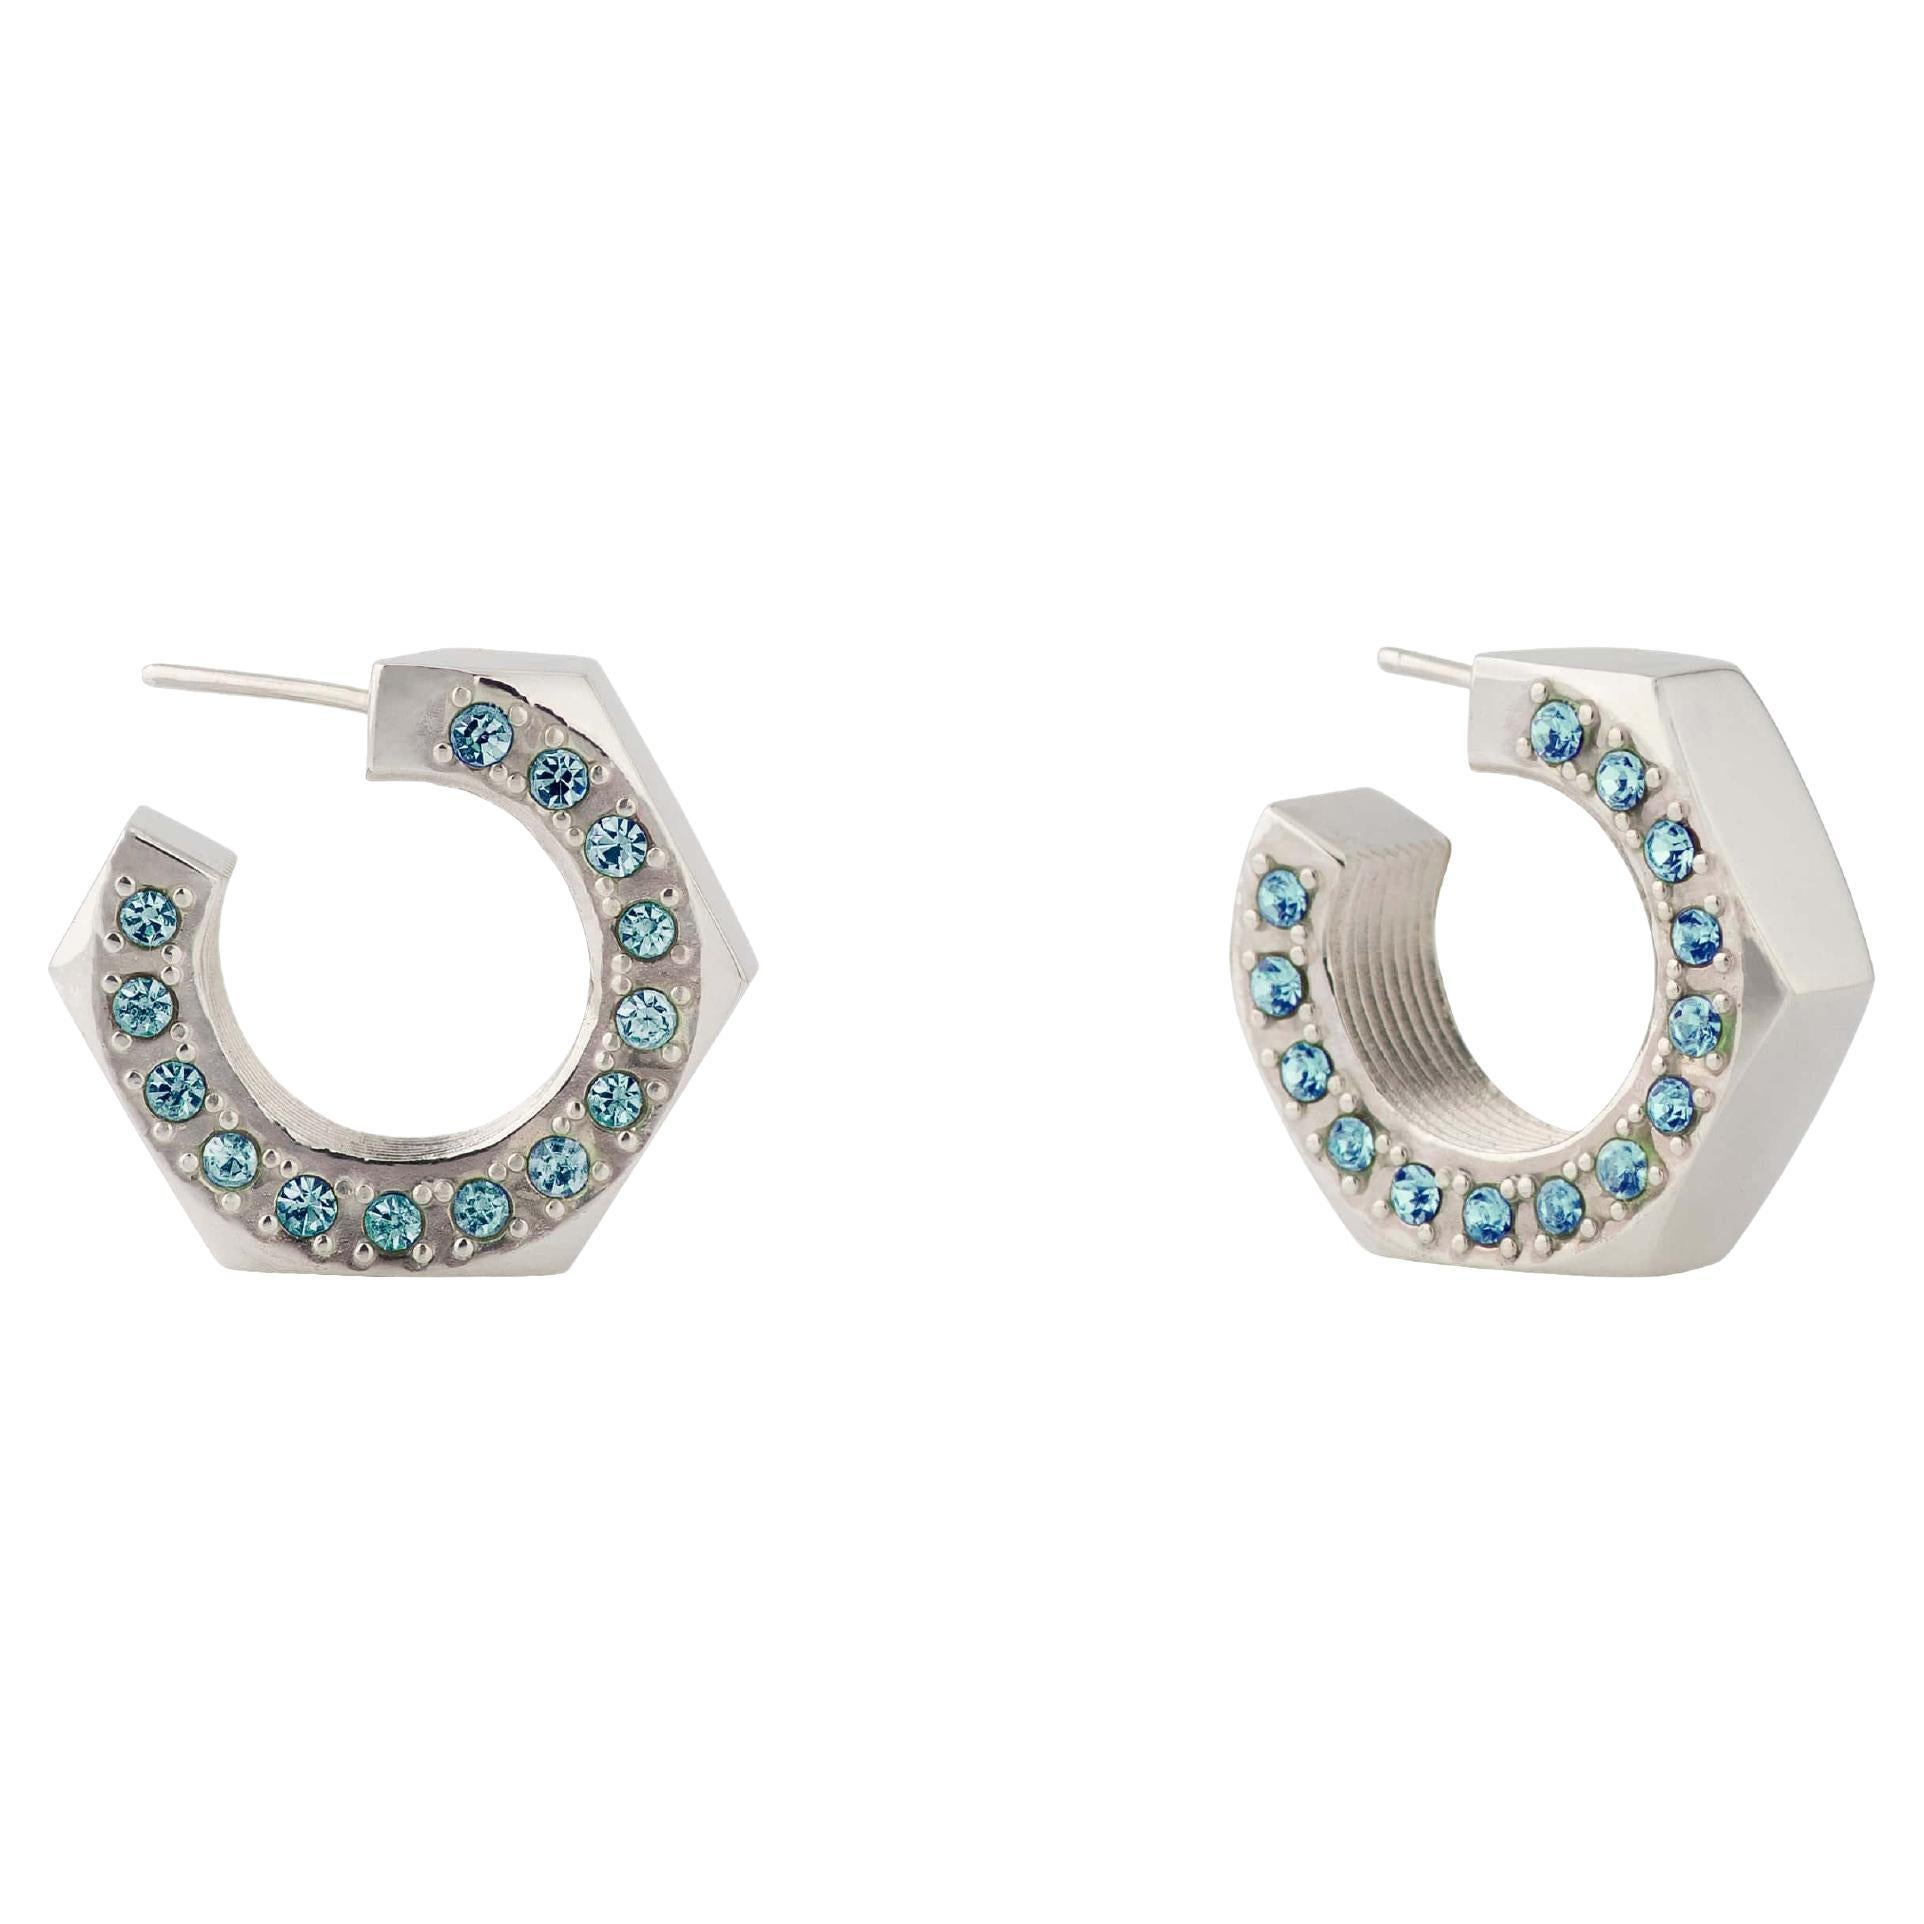 Big Sterling Silver Hoop Earrings with Natural Aquamarine Stones on the Side For Sale